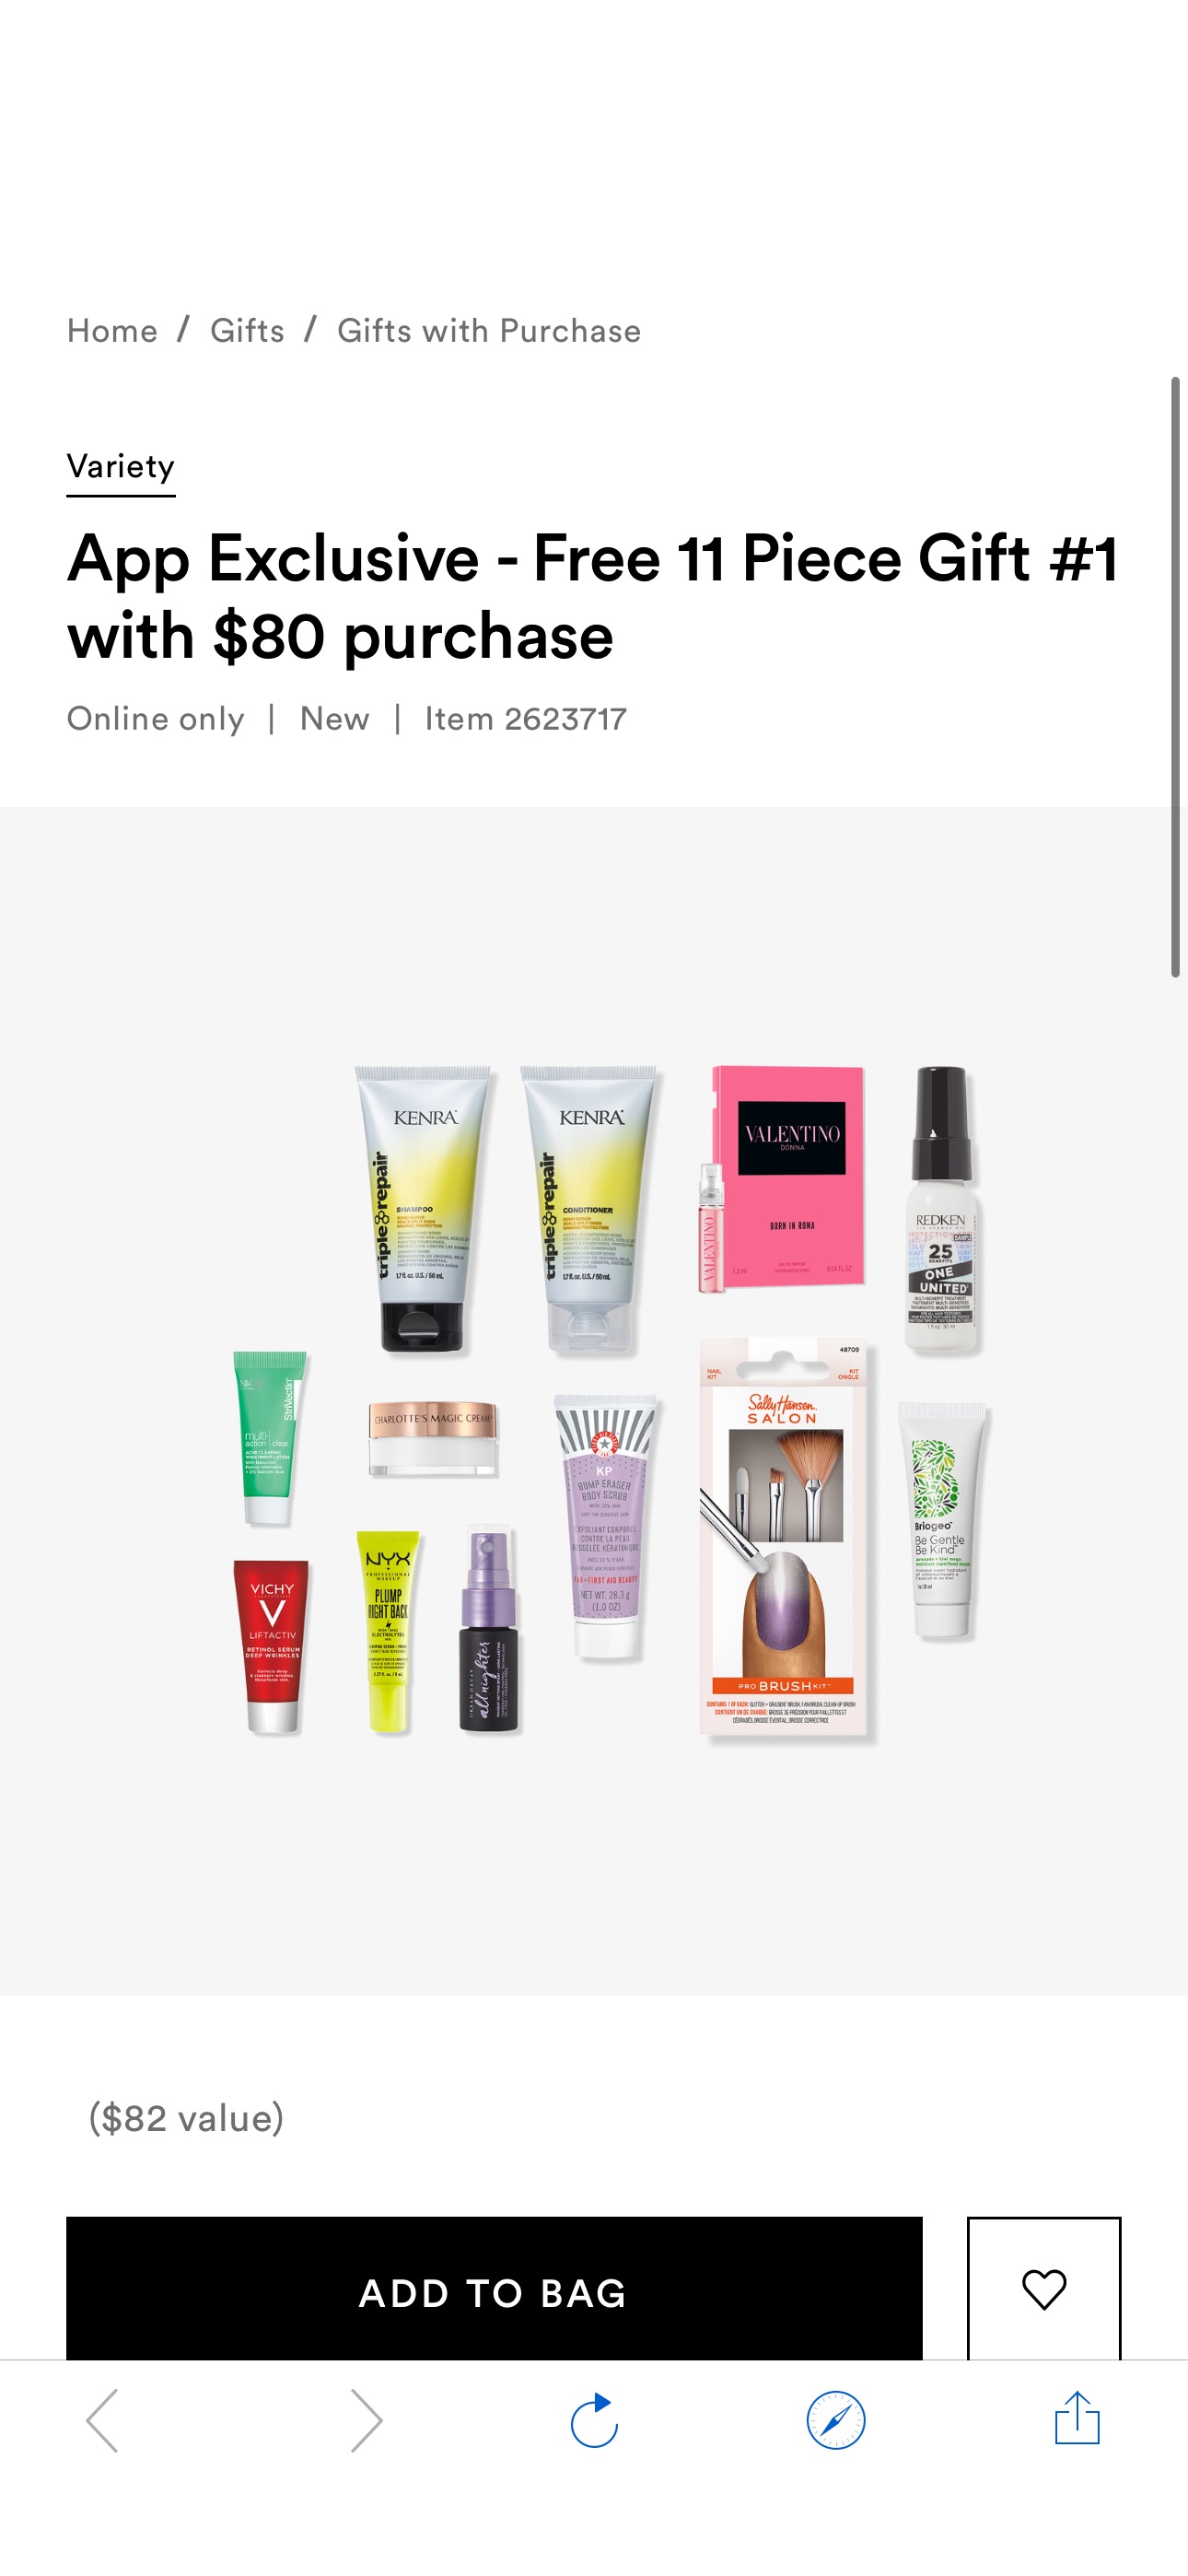 App Exclusive - Free 11 Piece Gift #1 with $80 purchase - Variety | Ulta Beauty